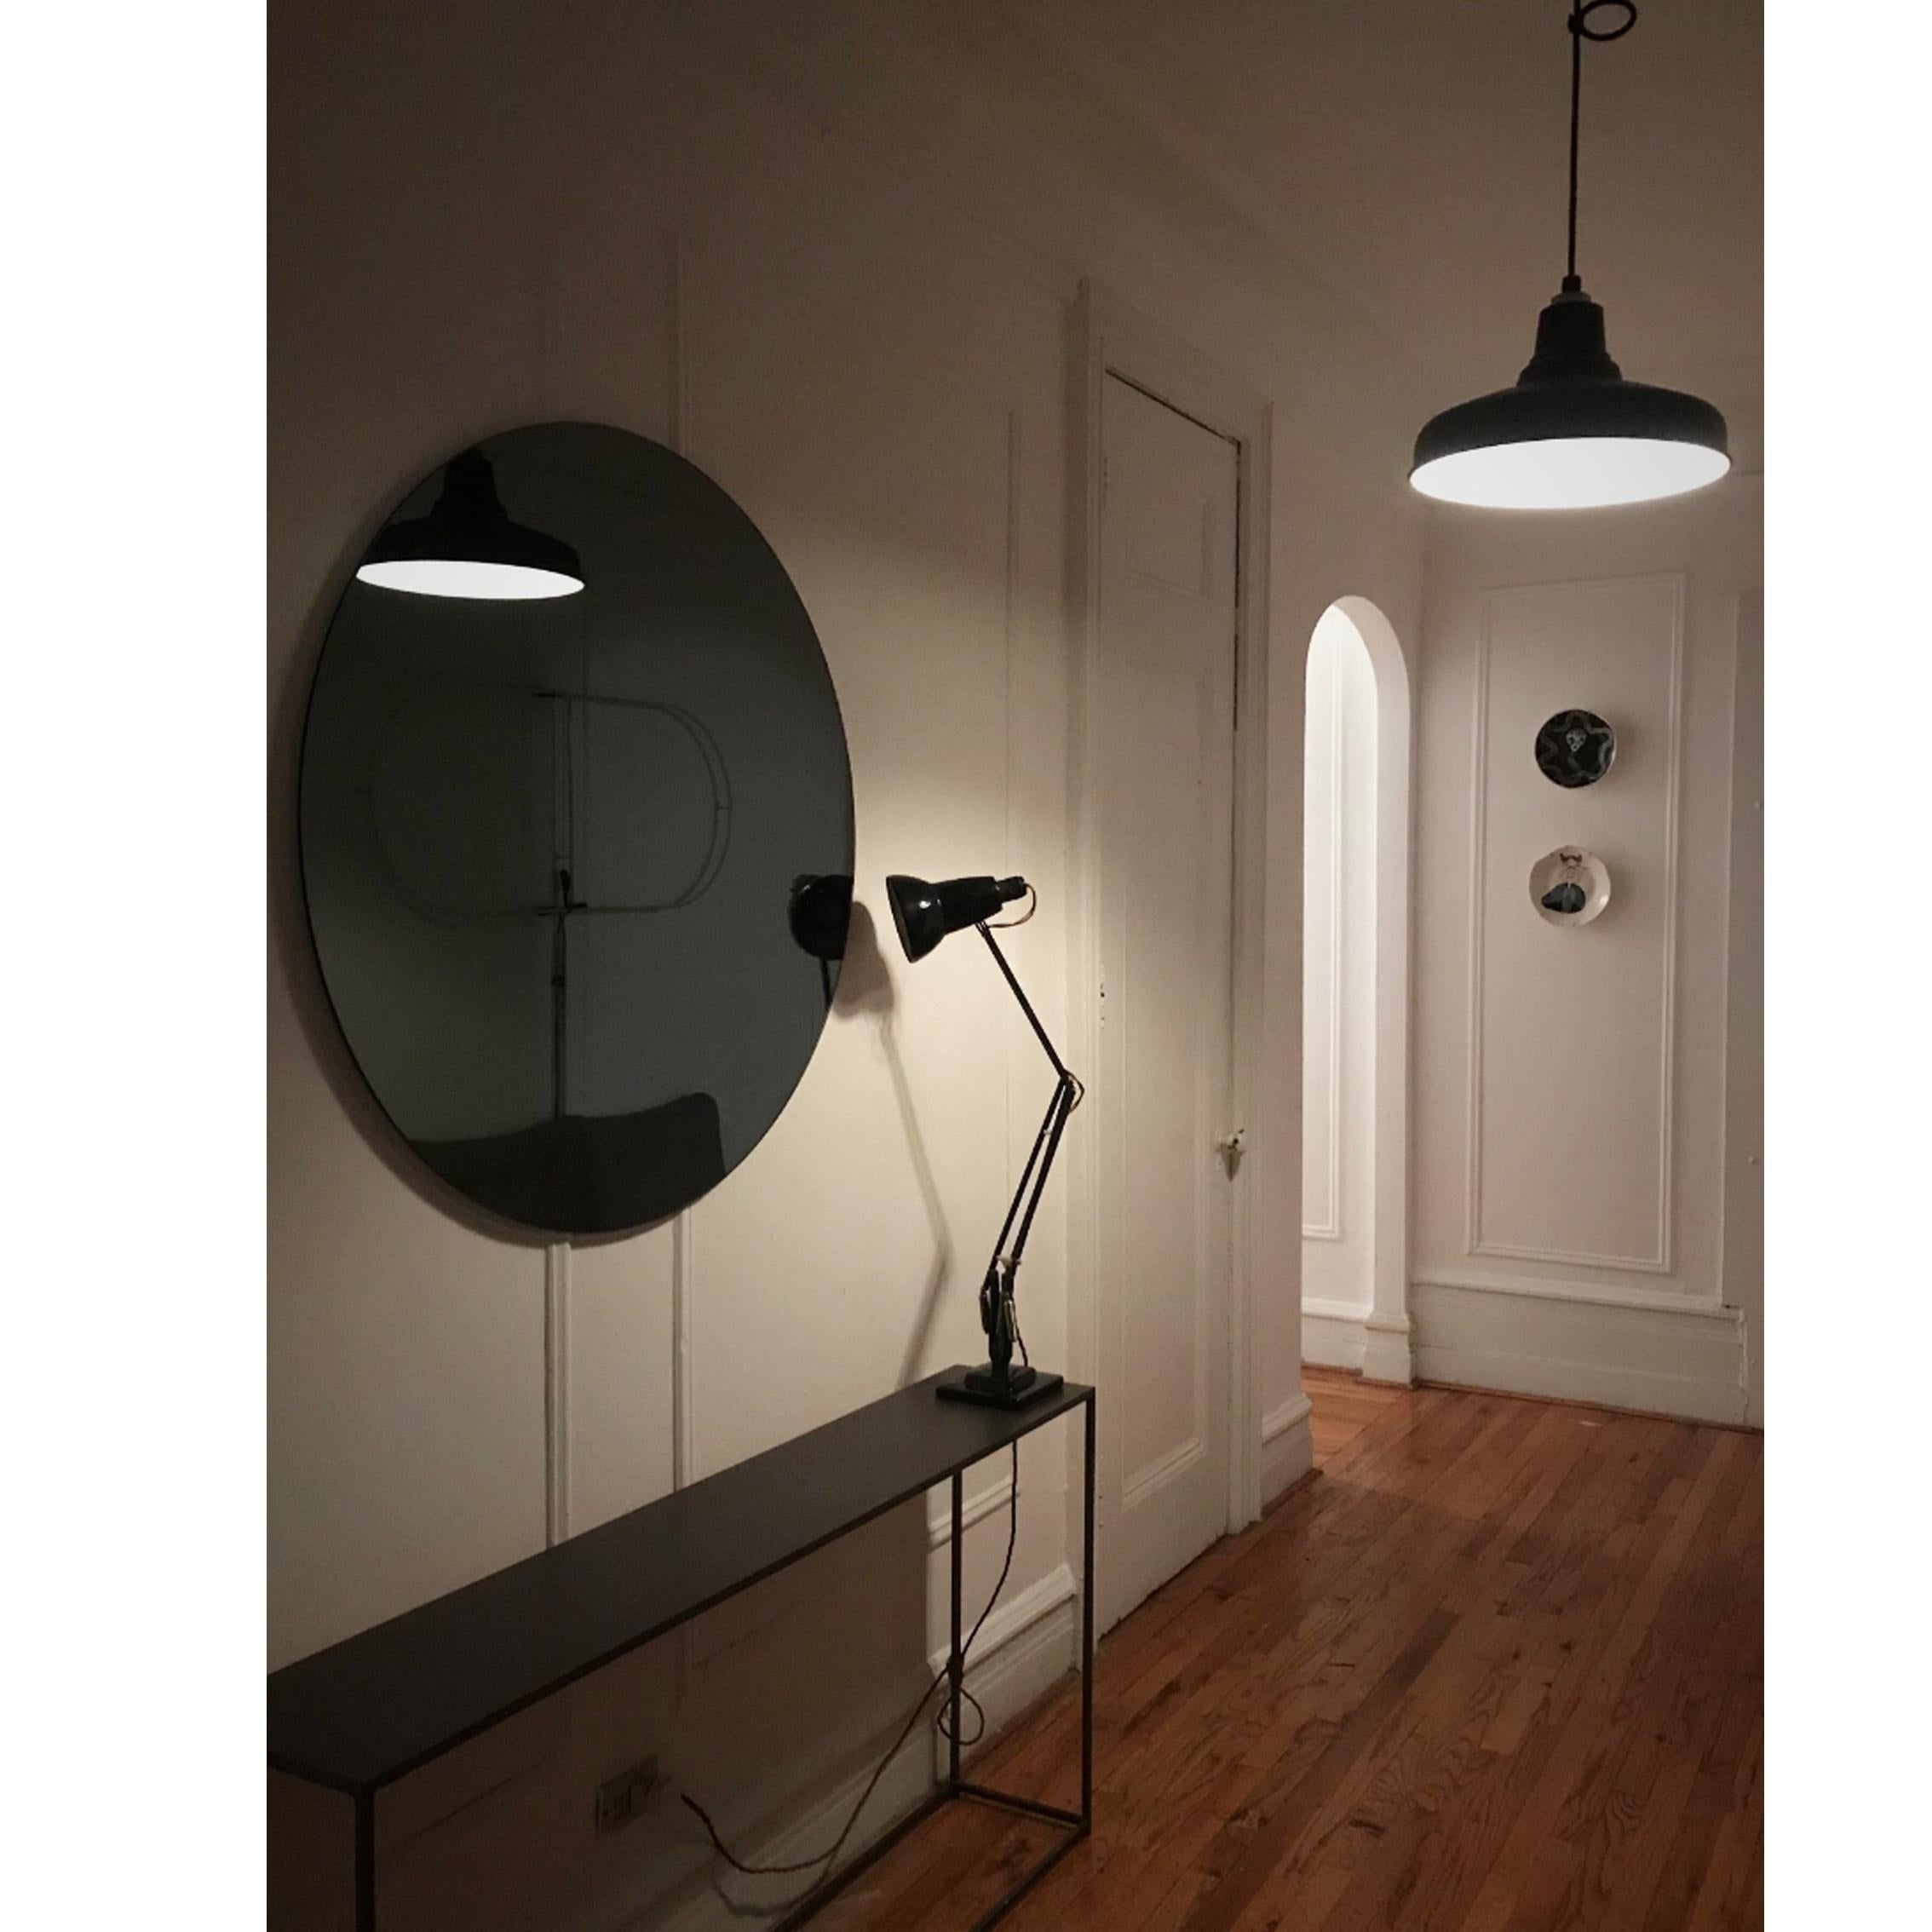 Blackened Orbis Black Tinted Round Frameless Contemporary Mirror, Floating Effect Regular For Sale